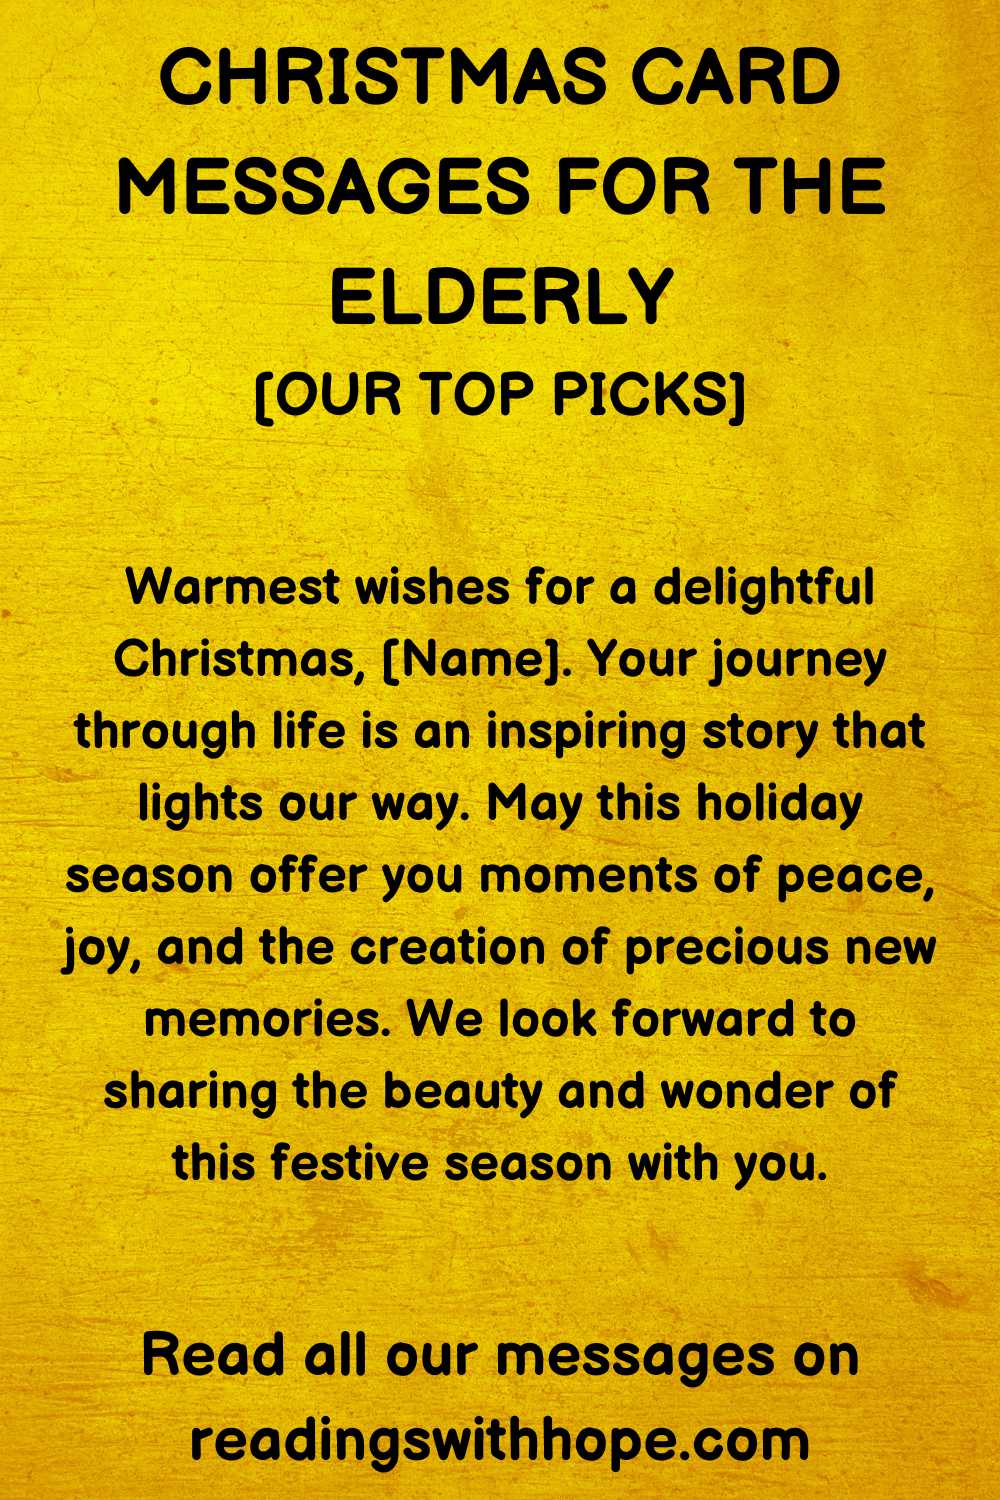 50 Christmas Card Messages For the Elderly